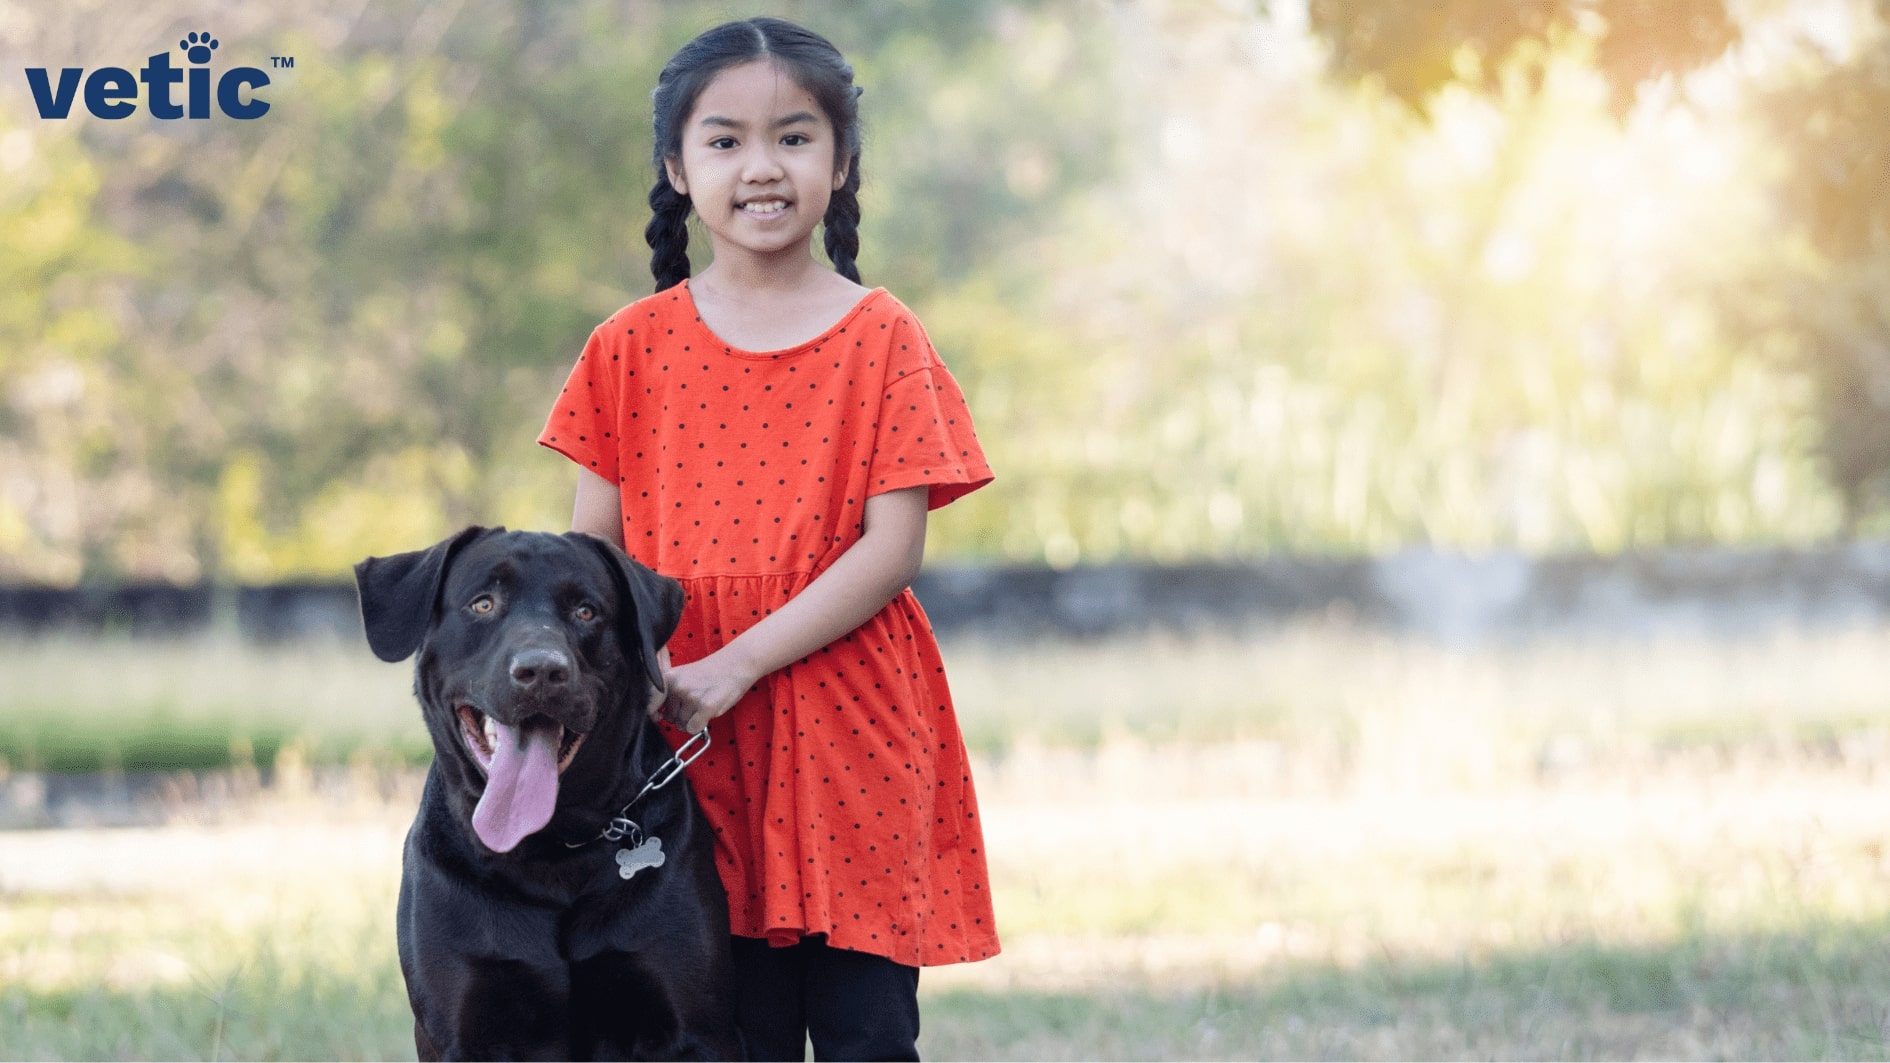 Young girl in a red dress and hair in two plaits standing and holding her black Labrador Retriever by the collar.